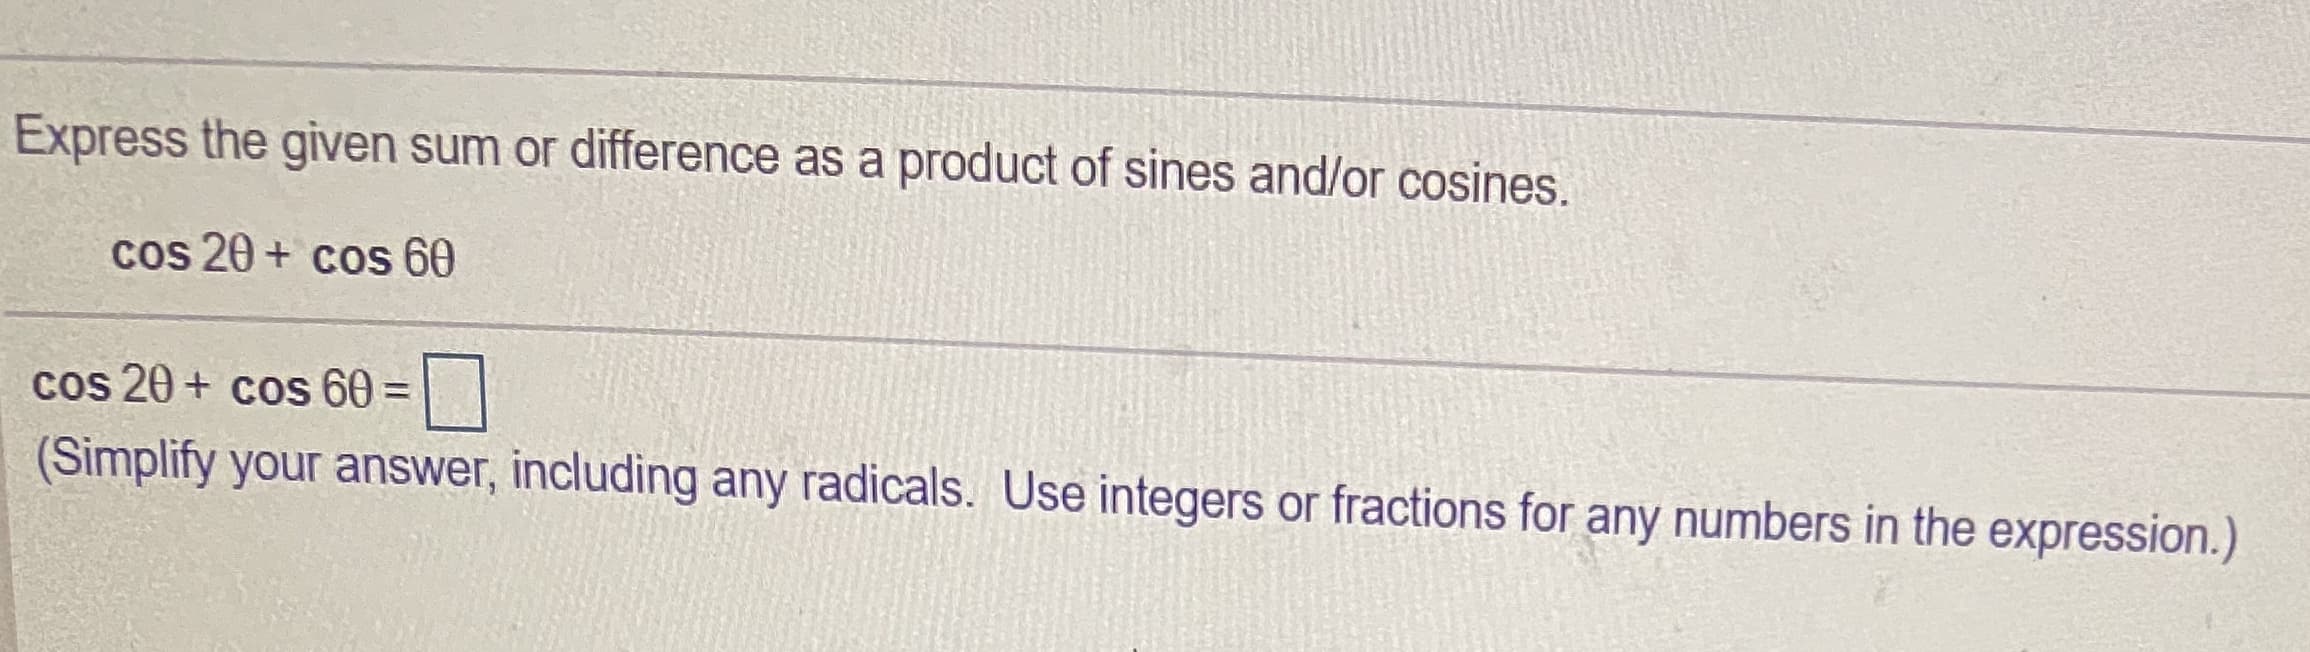 Express the given sum or difference as a product of sines and/or cosines.
cos 20 + cos 60
